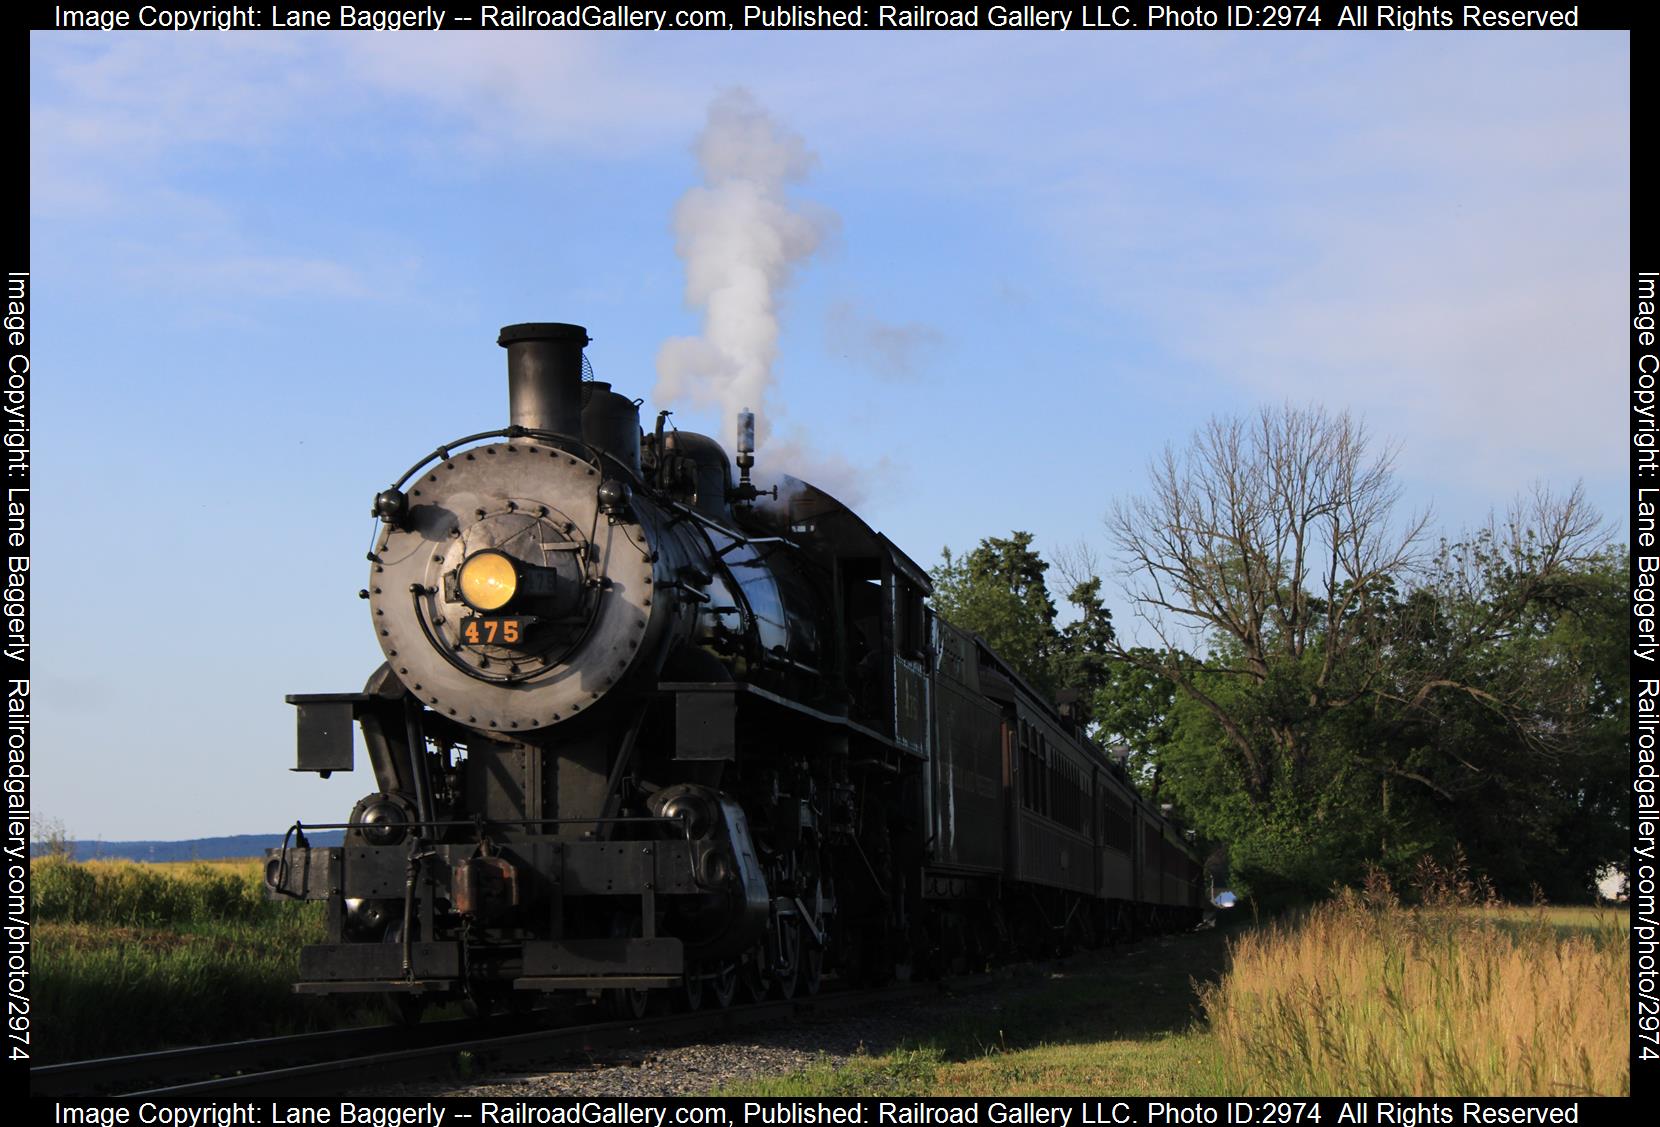 N&W 475 is a class 4-8-0 and  is pictured in Strasburg, Pennsylvania, United States.  This was taken along the SRC on the Strasburg Rail Road. Photo Copyright: Lane Baggerly uploaded to Railroad Gallery on 01/16/2024. This photograph of N&W 475 was taken on Friday, May 26, 2023. All Rights Reserved. 